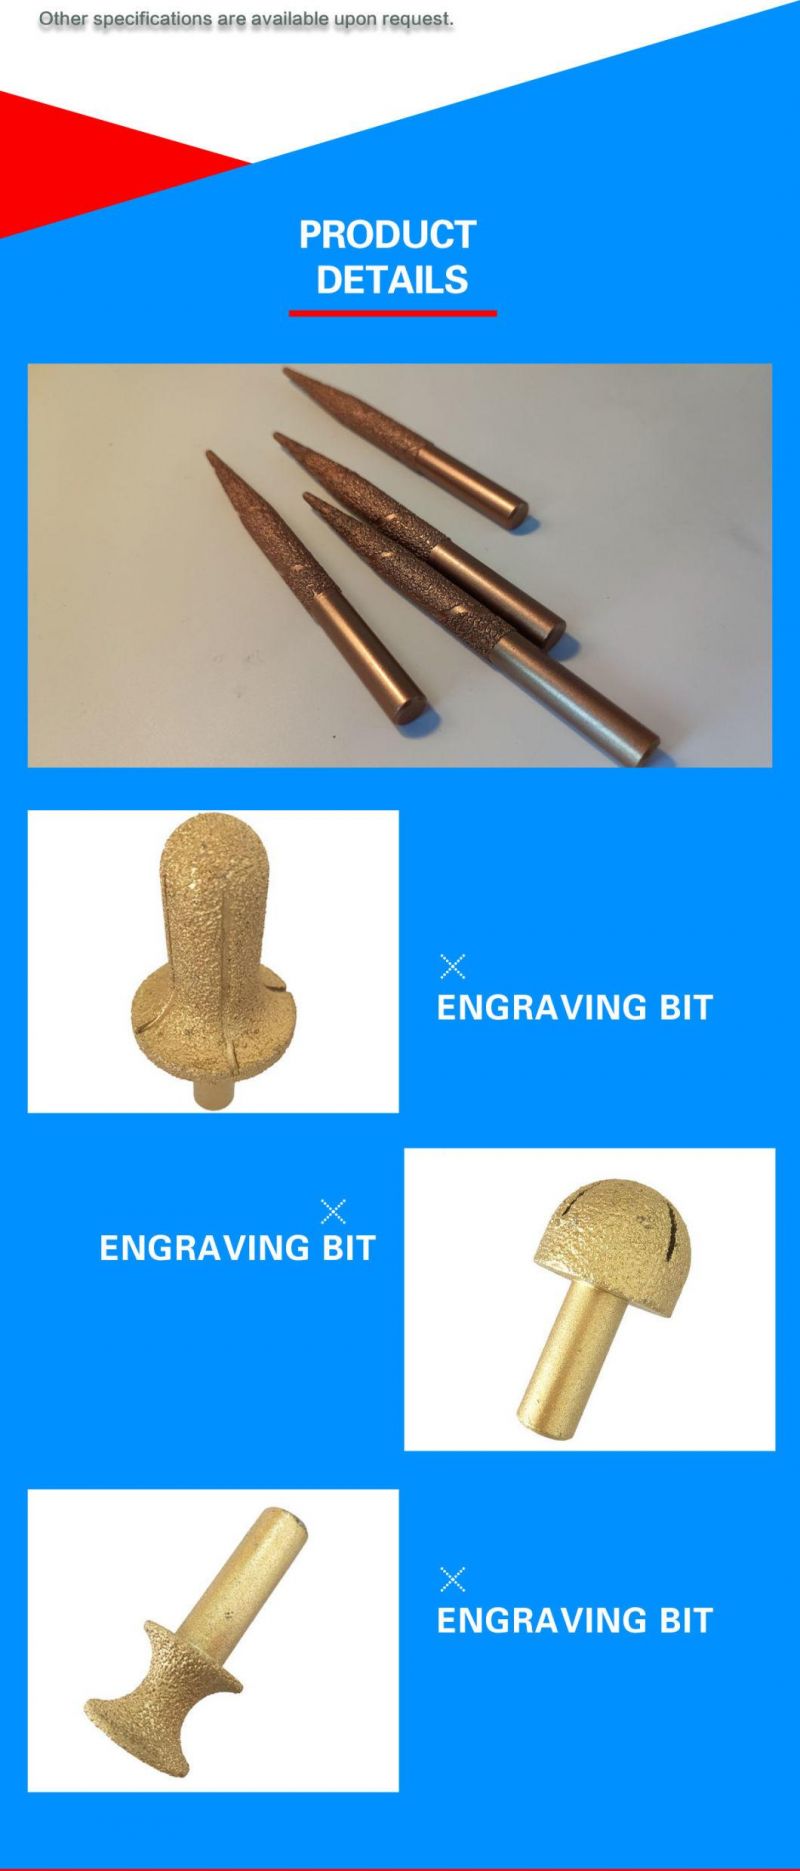 CNC Brazed Diamond Router Bits for Carving Stone/Marble/Granite